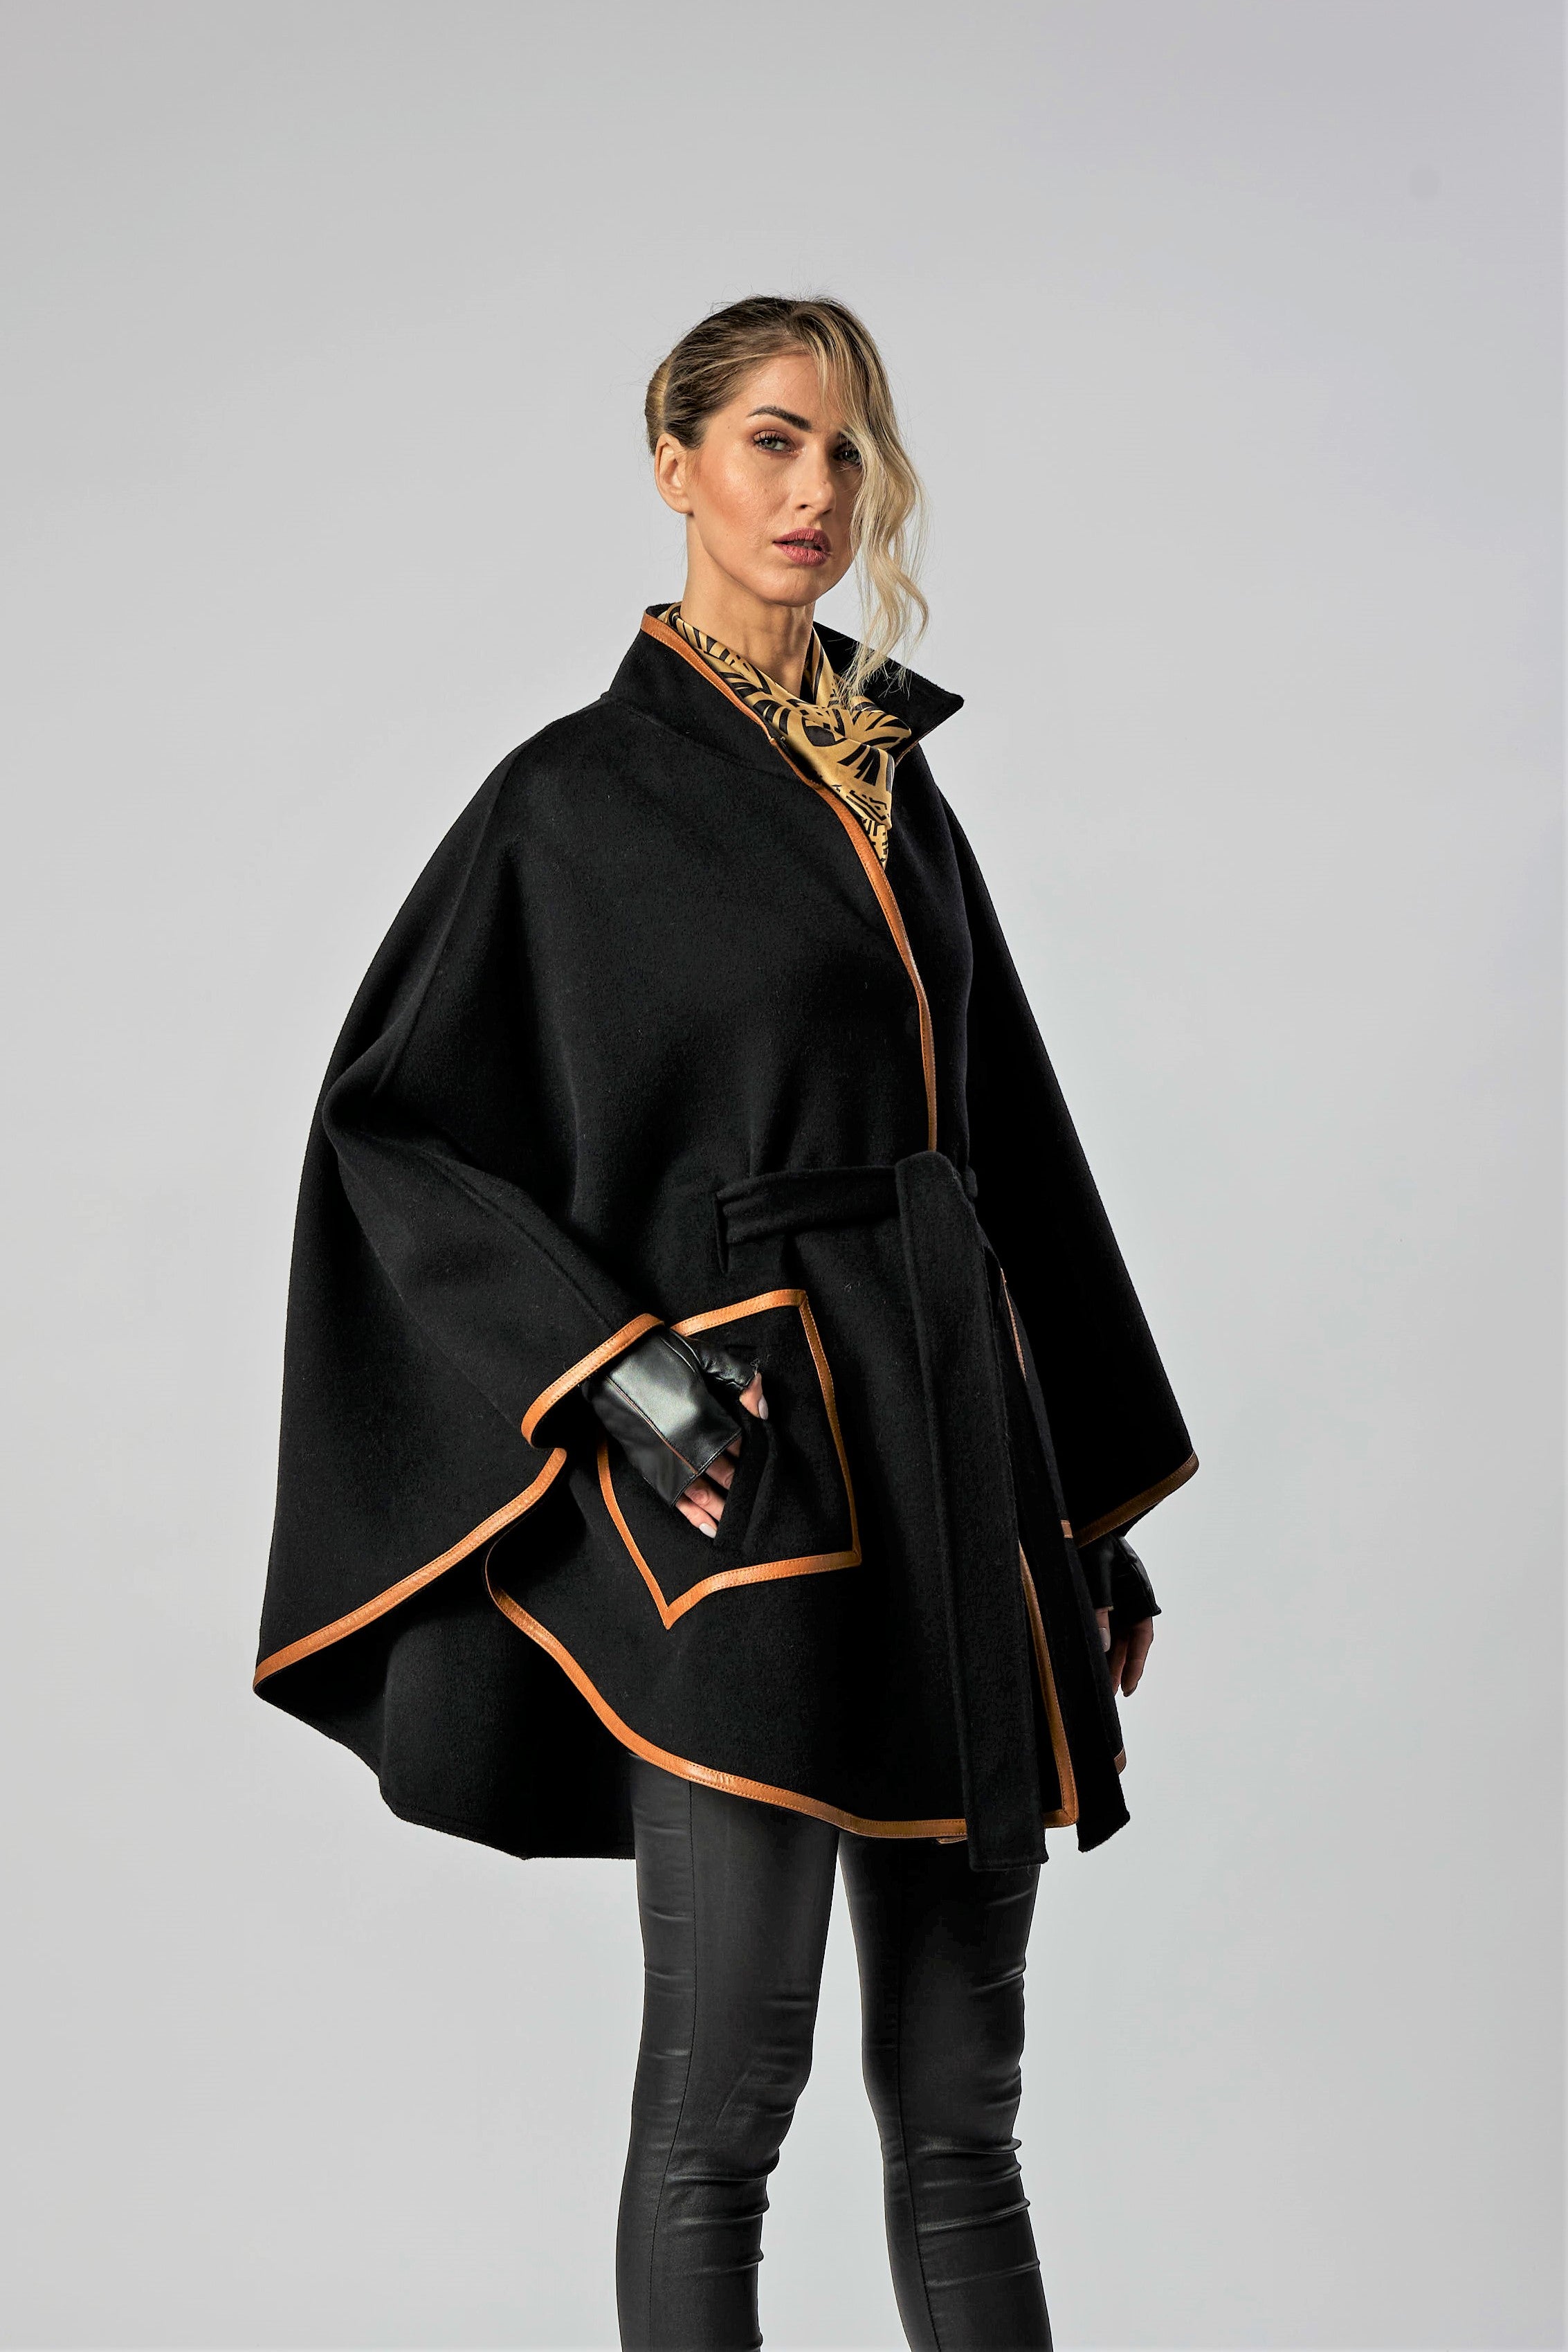 Alesia Chaika Designer Exclusive Cape Coats and Jackets Collection